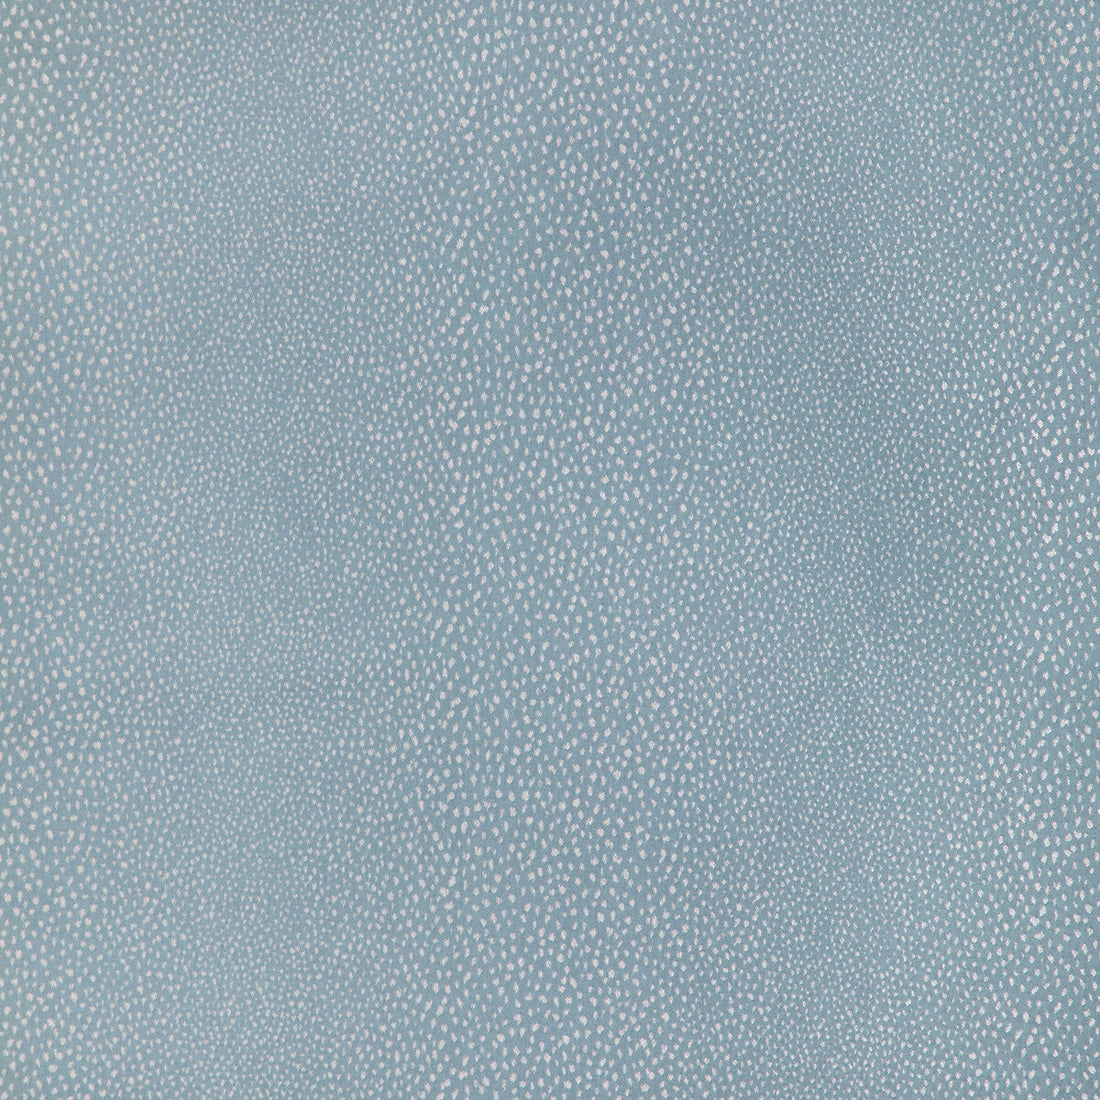 Evening Drizzle fabric in slate color - pattern 36757.52.0 - by Kravet Design in the Candice Olson collection